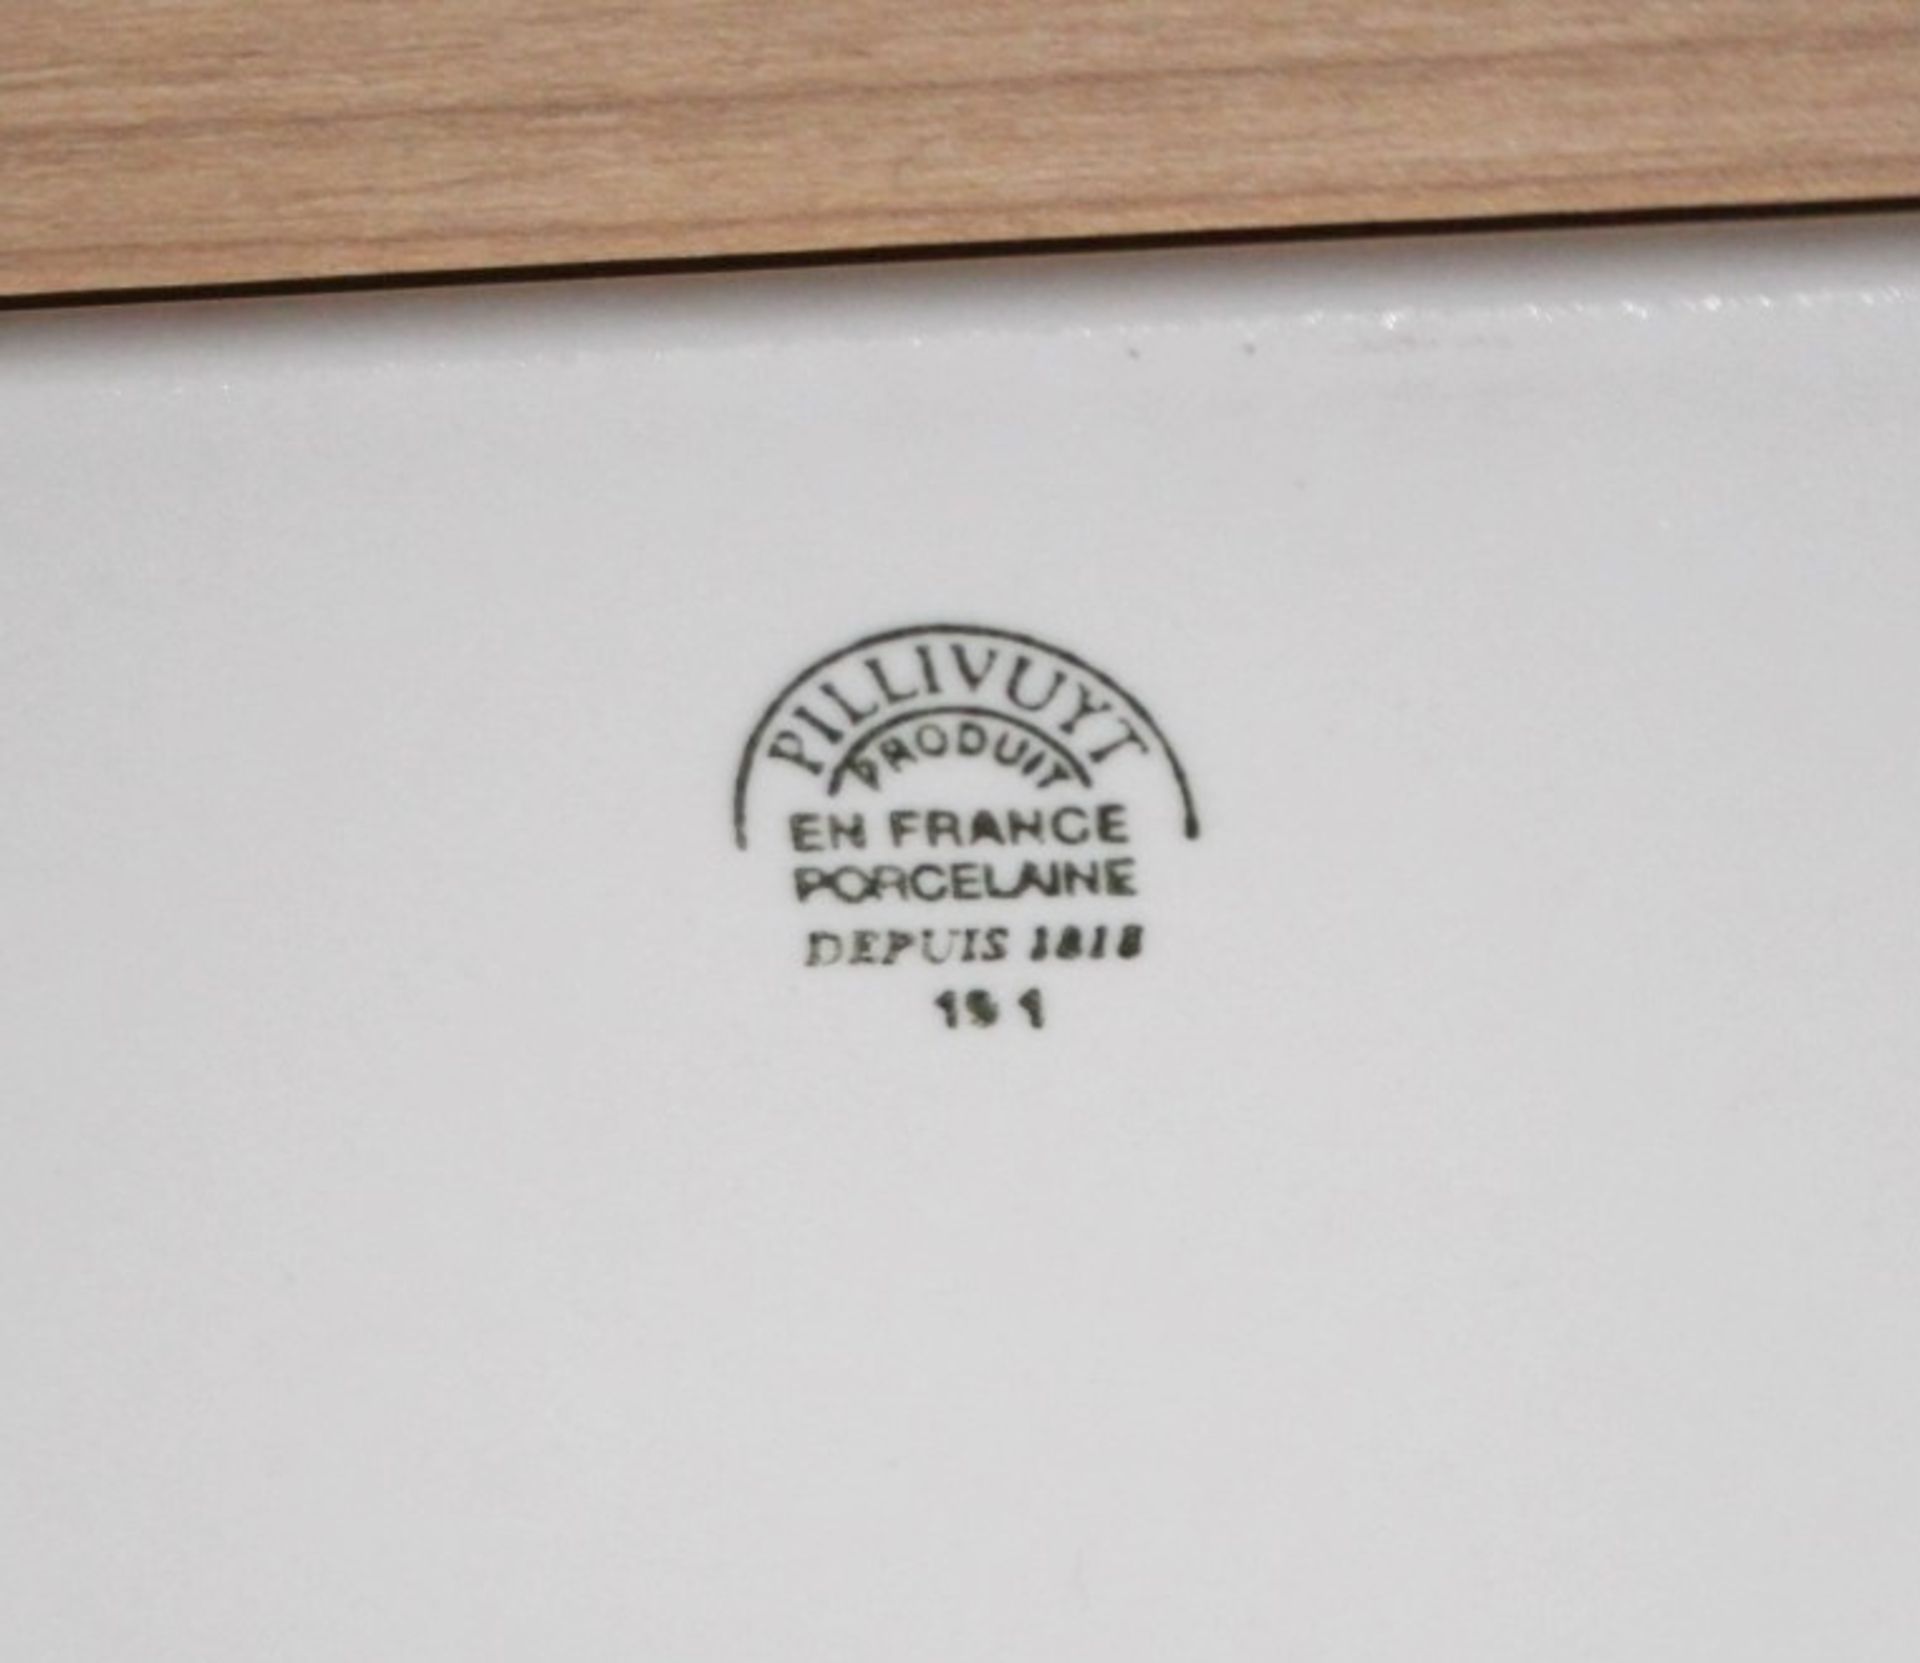 12 x PILLIVUYT Porcelain Rectangular Serving Trays In White Featuring 'Famous Branding' In Gold - - Image 7 of 7